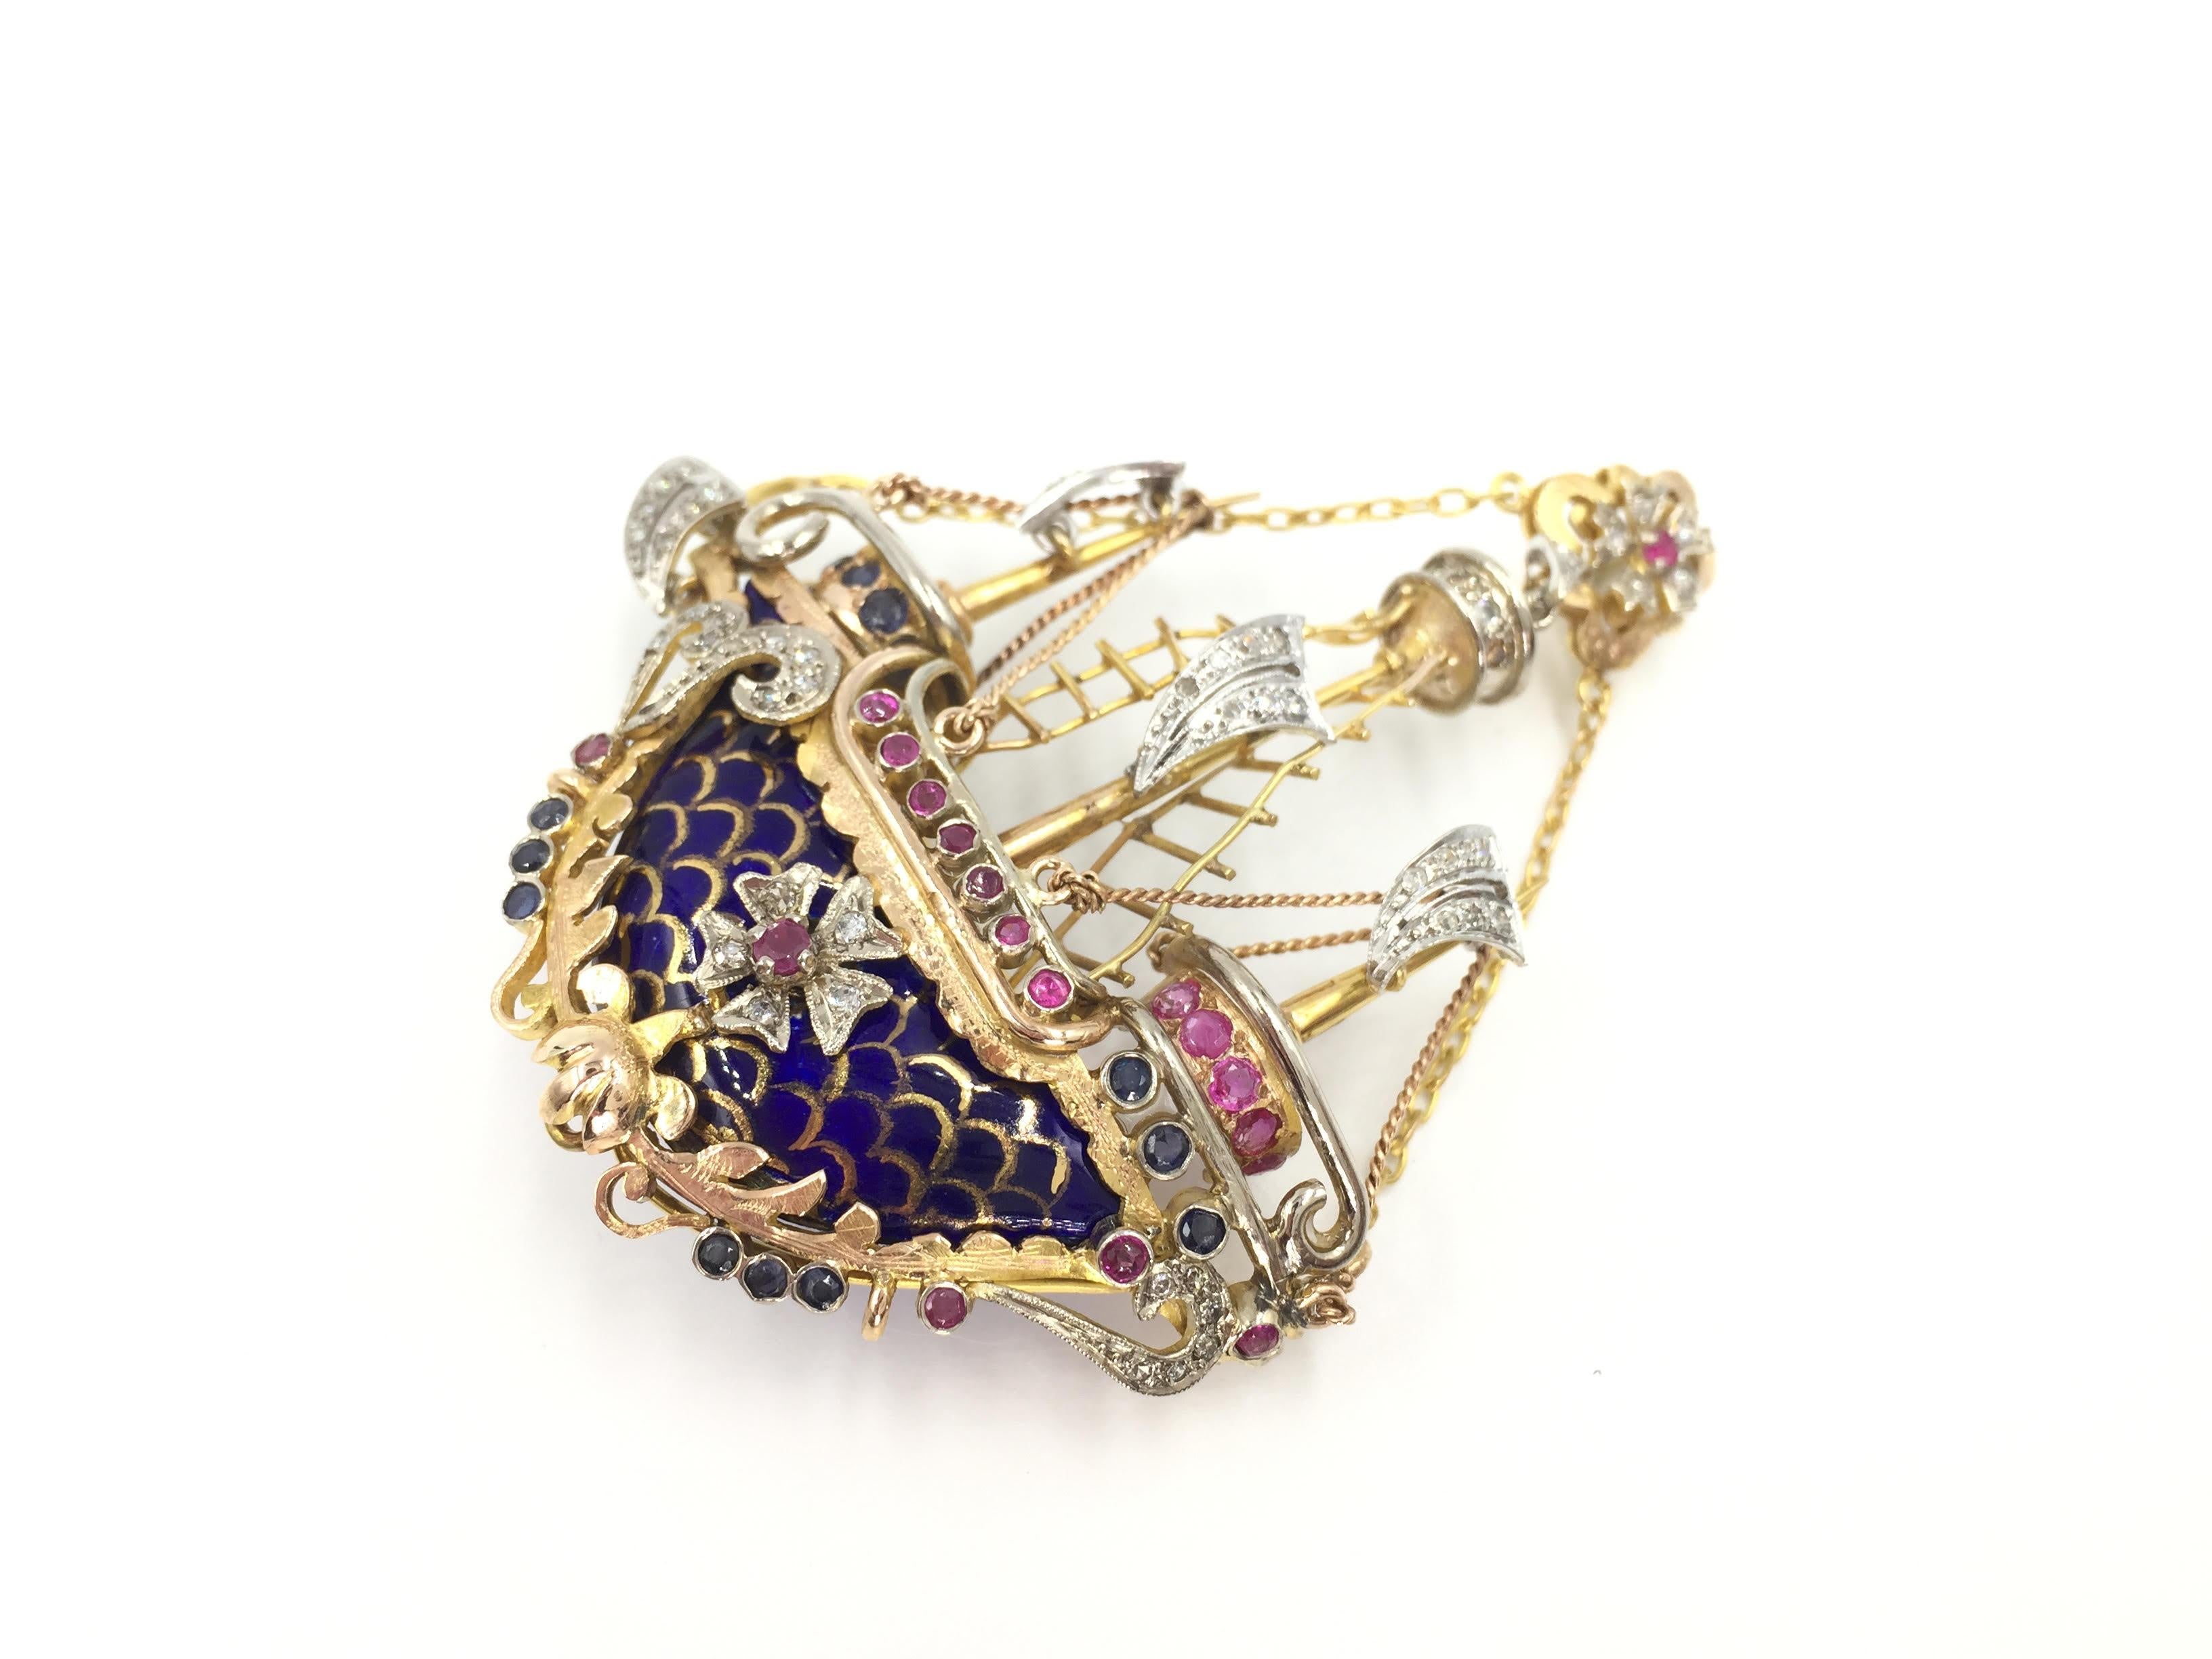 Circa 1940's large hand-crafted intricate sailing ship brooch that doubles as a pendant. 14 Karat yellow gold sailing ship has incredible detail down to the roped ladders and crows nest on the main mast. Even two of the diamond sails are designed to